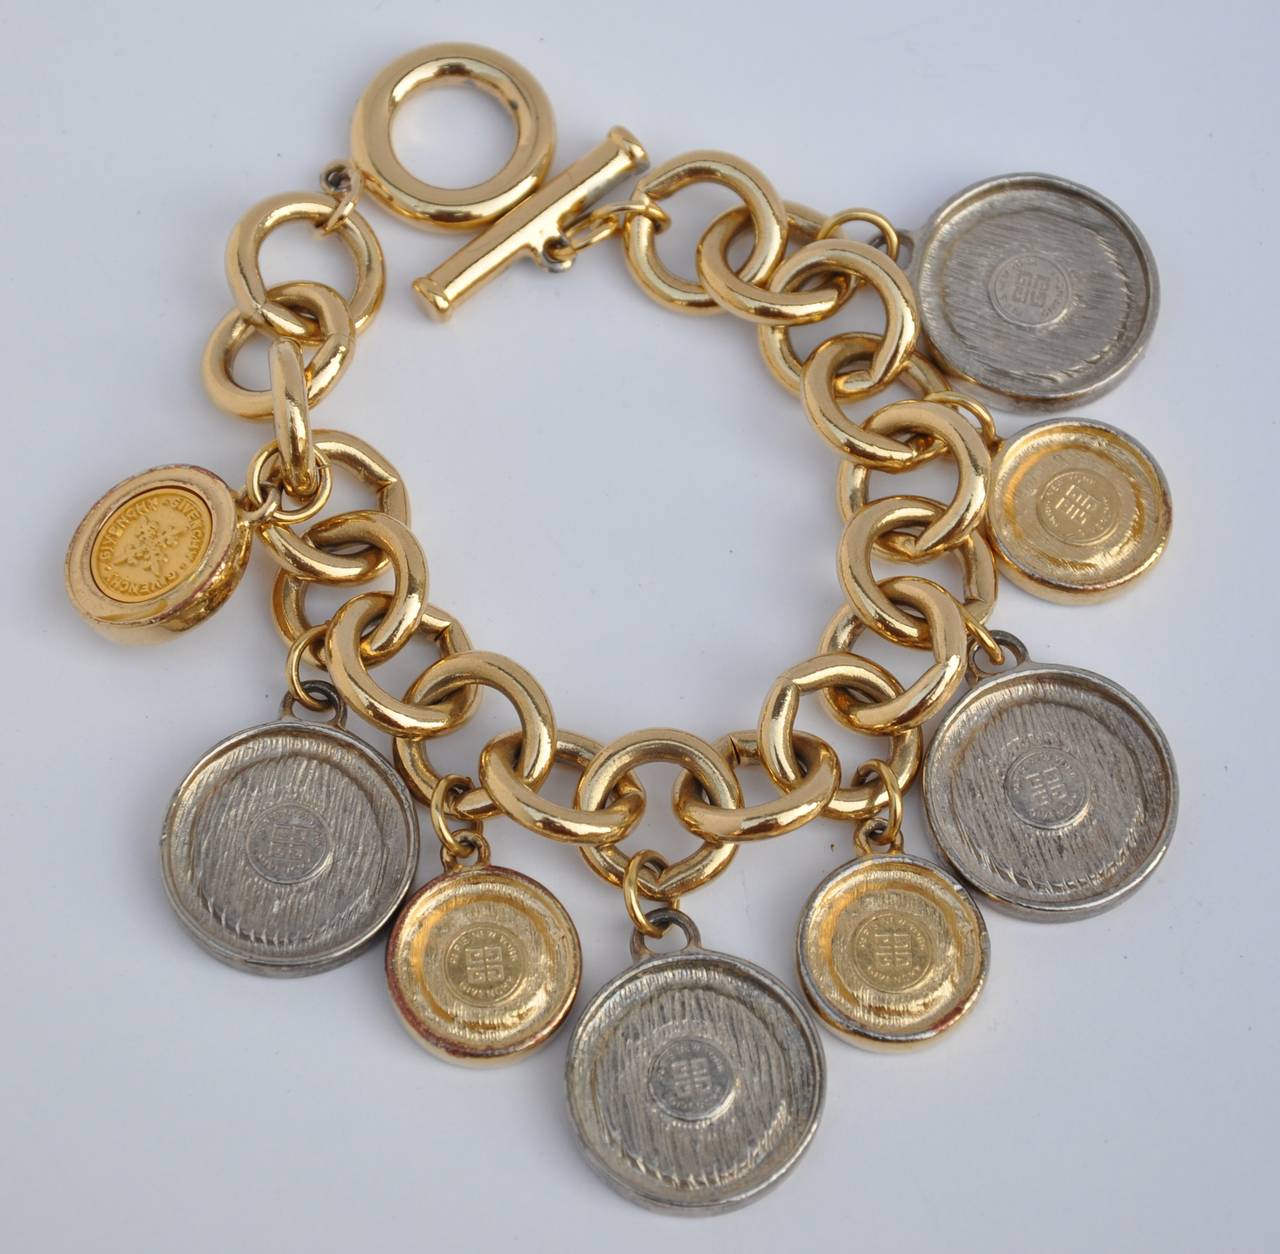 Givenchy gilded gold hardware multi-size coin charm bracelet measures 8" in length, width is 1 3/4" depth is 1/8". Each of the eight coins are signed on the backside.